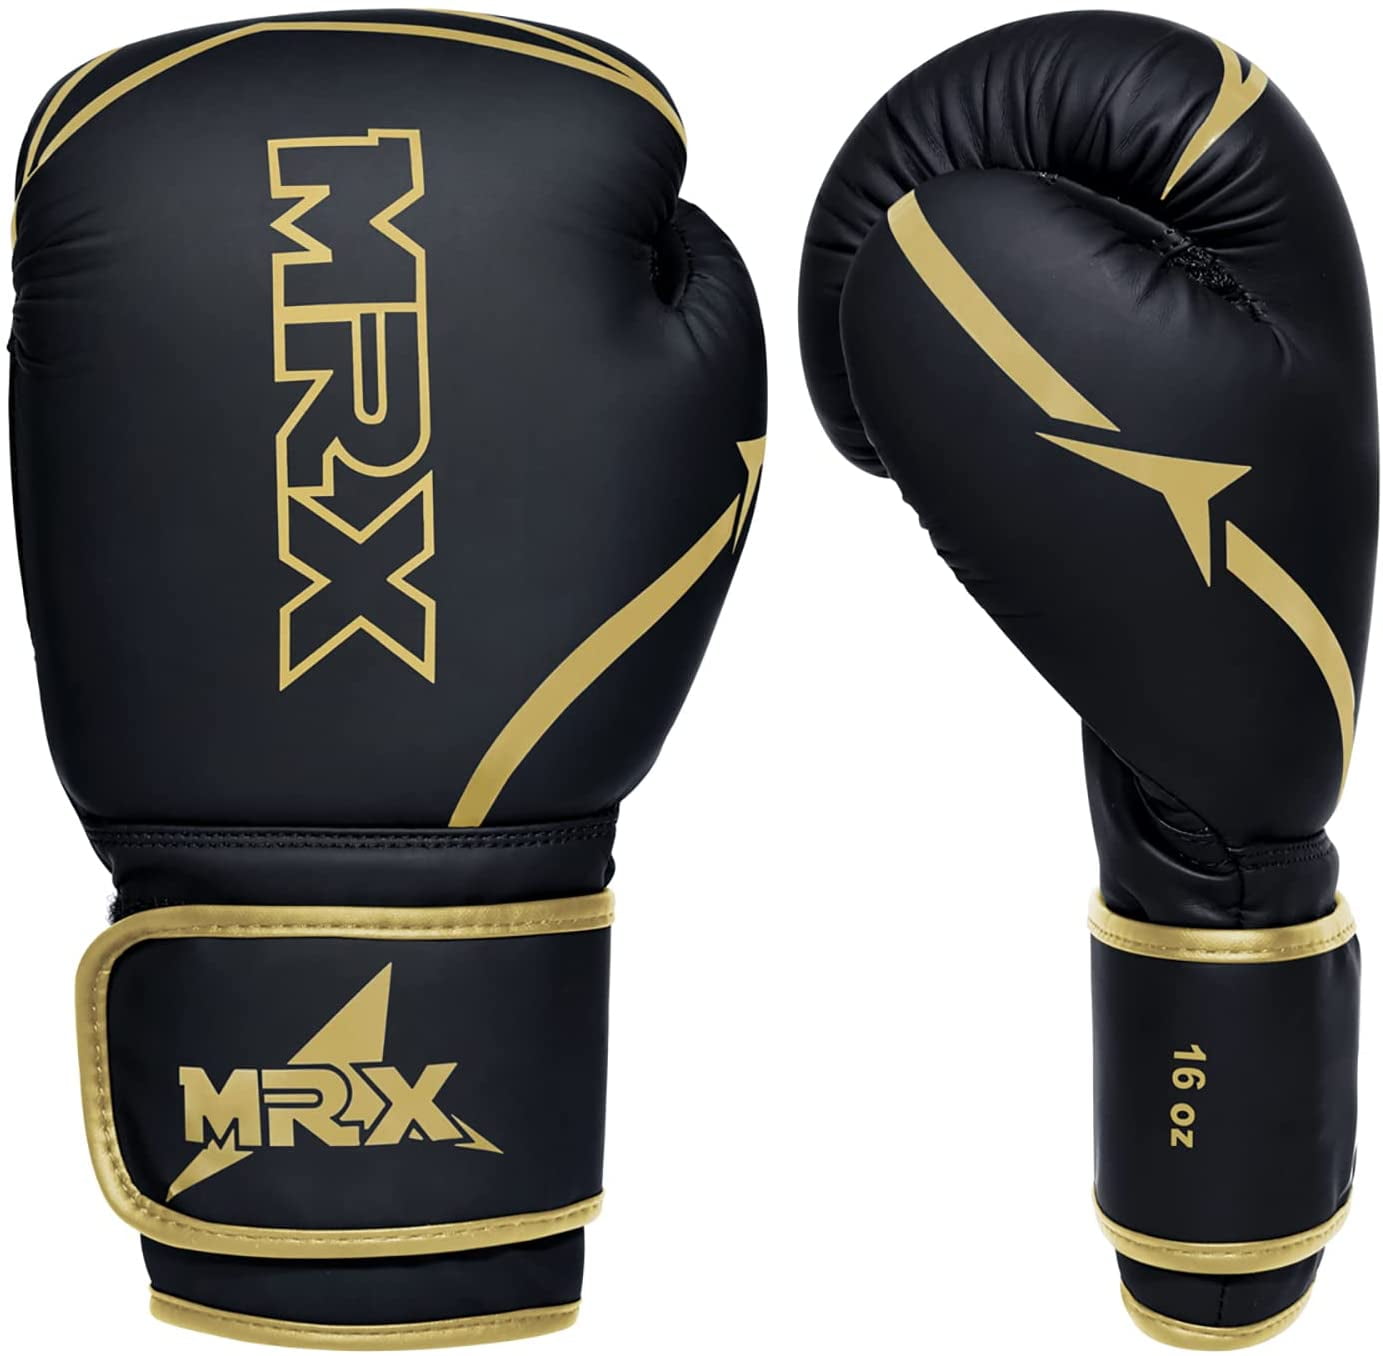 12 Oz Boxing Gloves Pro Leather Training Sparring Mitts Punching Bag Muay Thai 